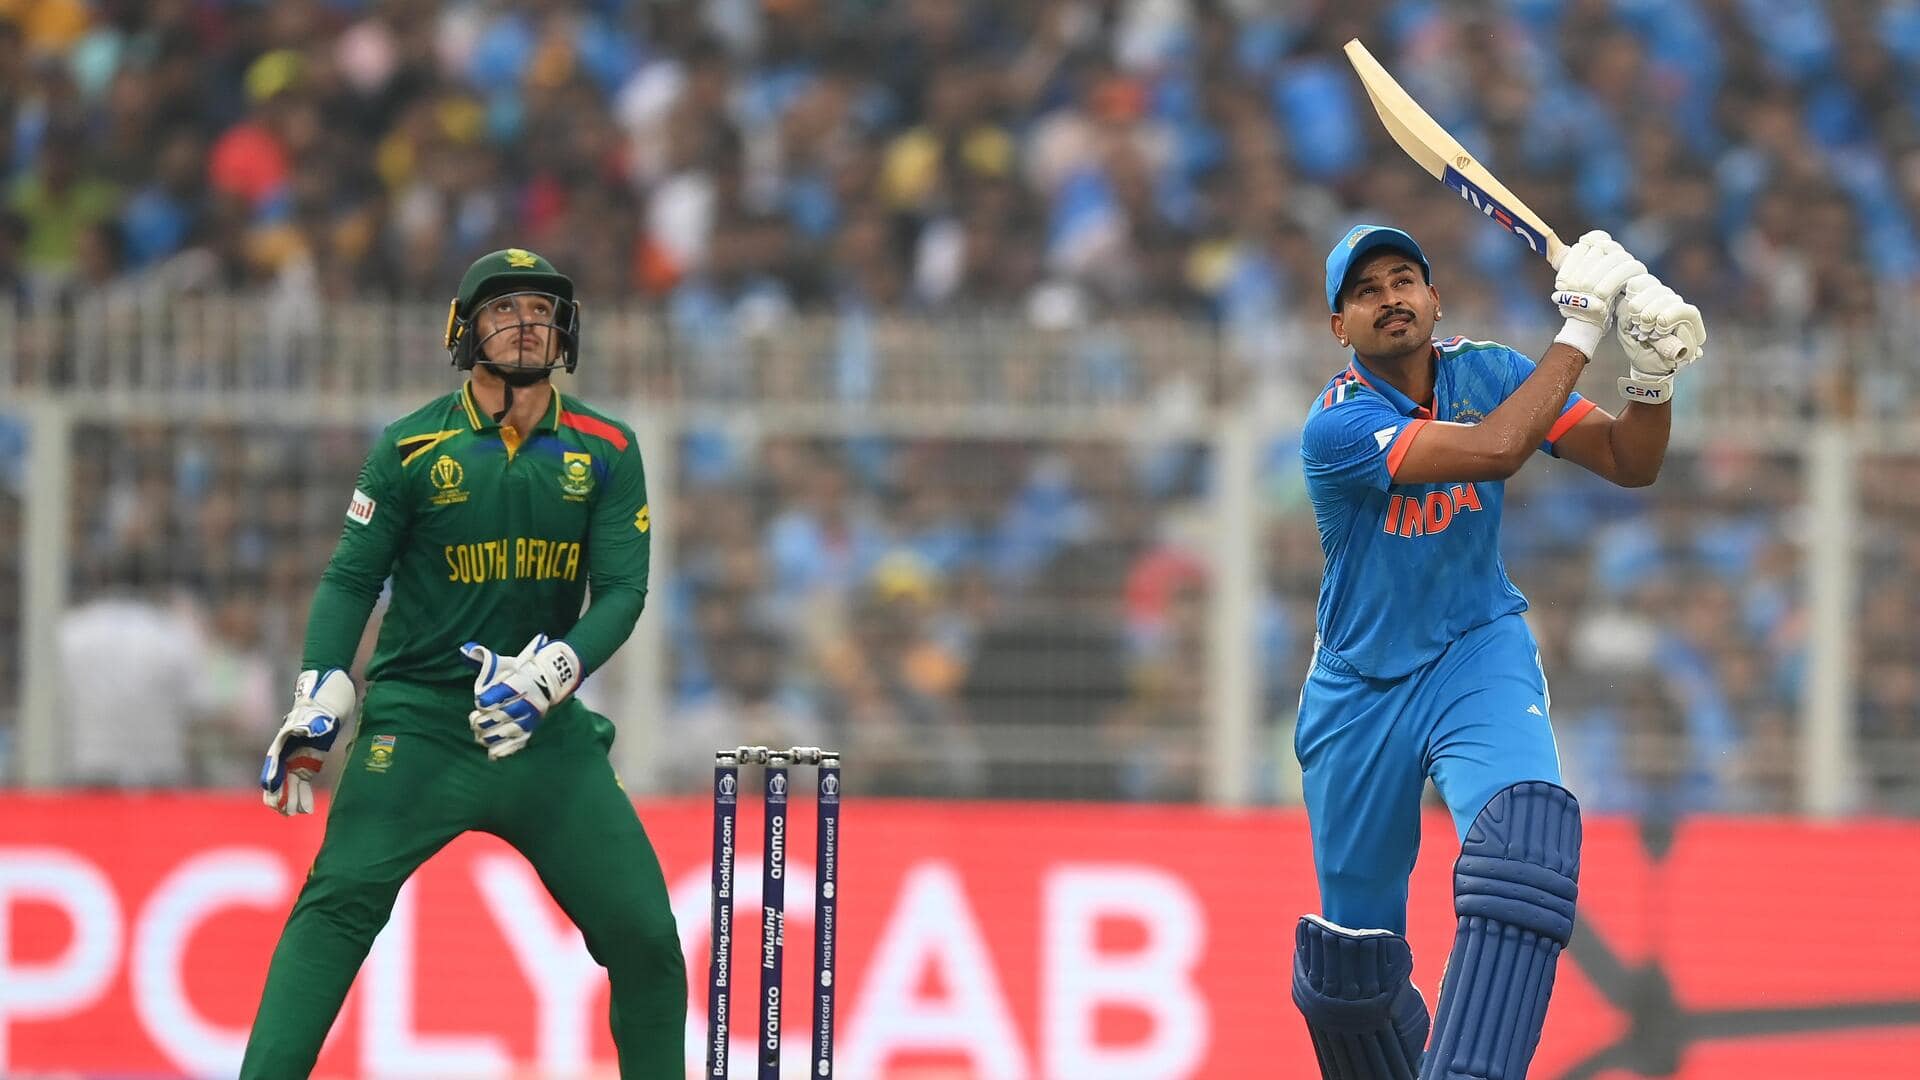 ICC World Cup: Shreyas Iyer registers his second successive fifty